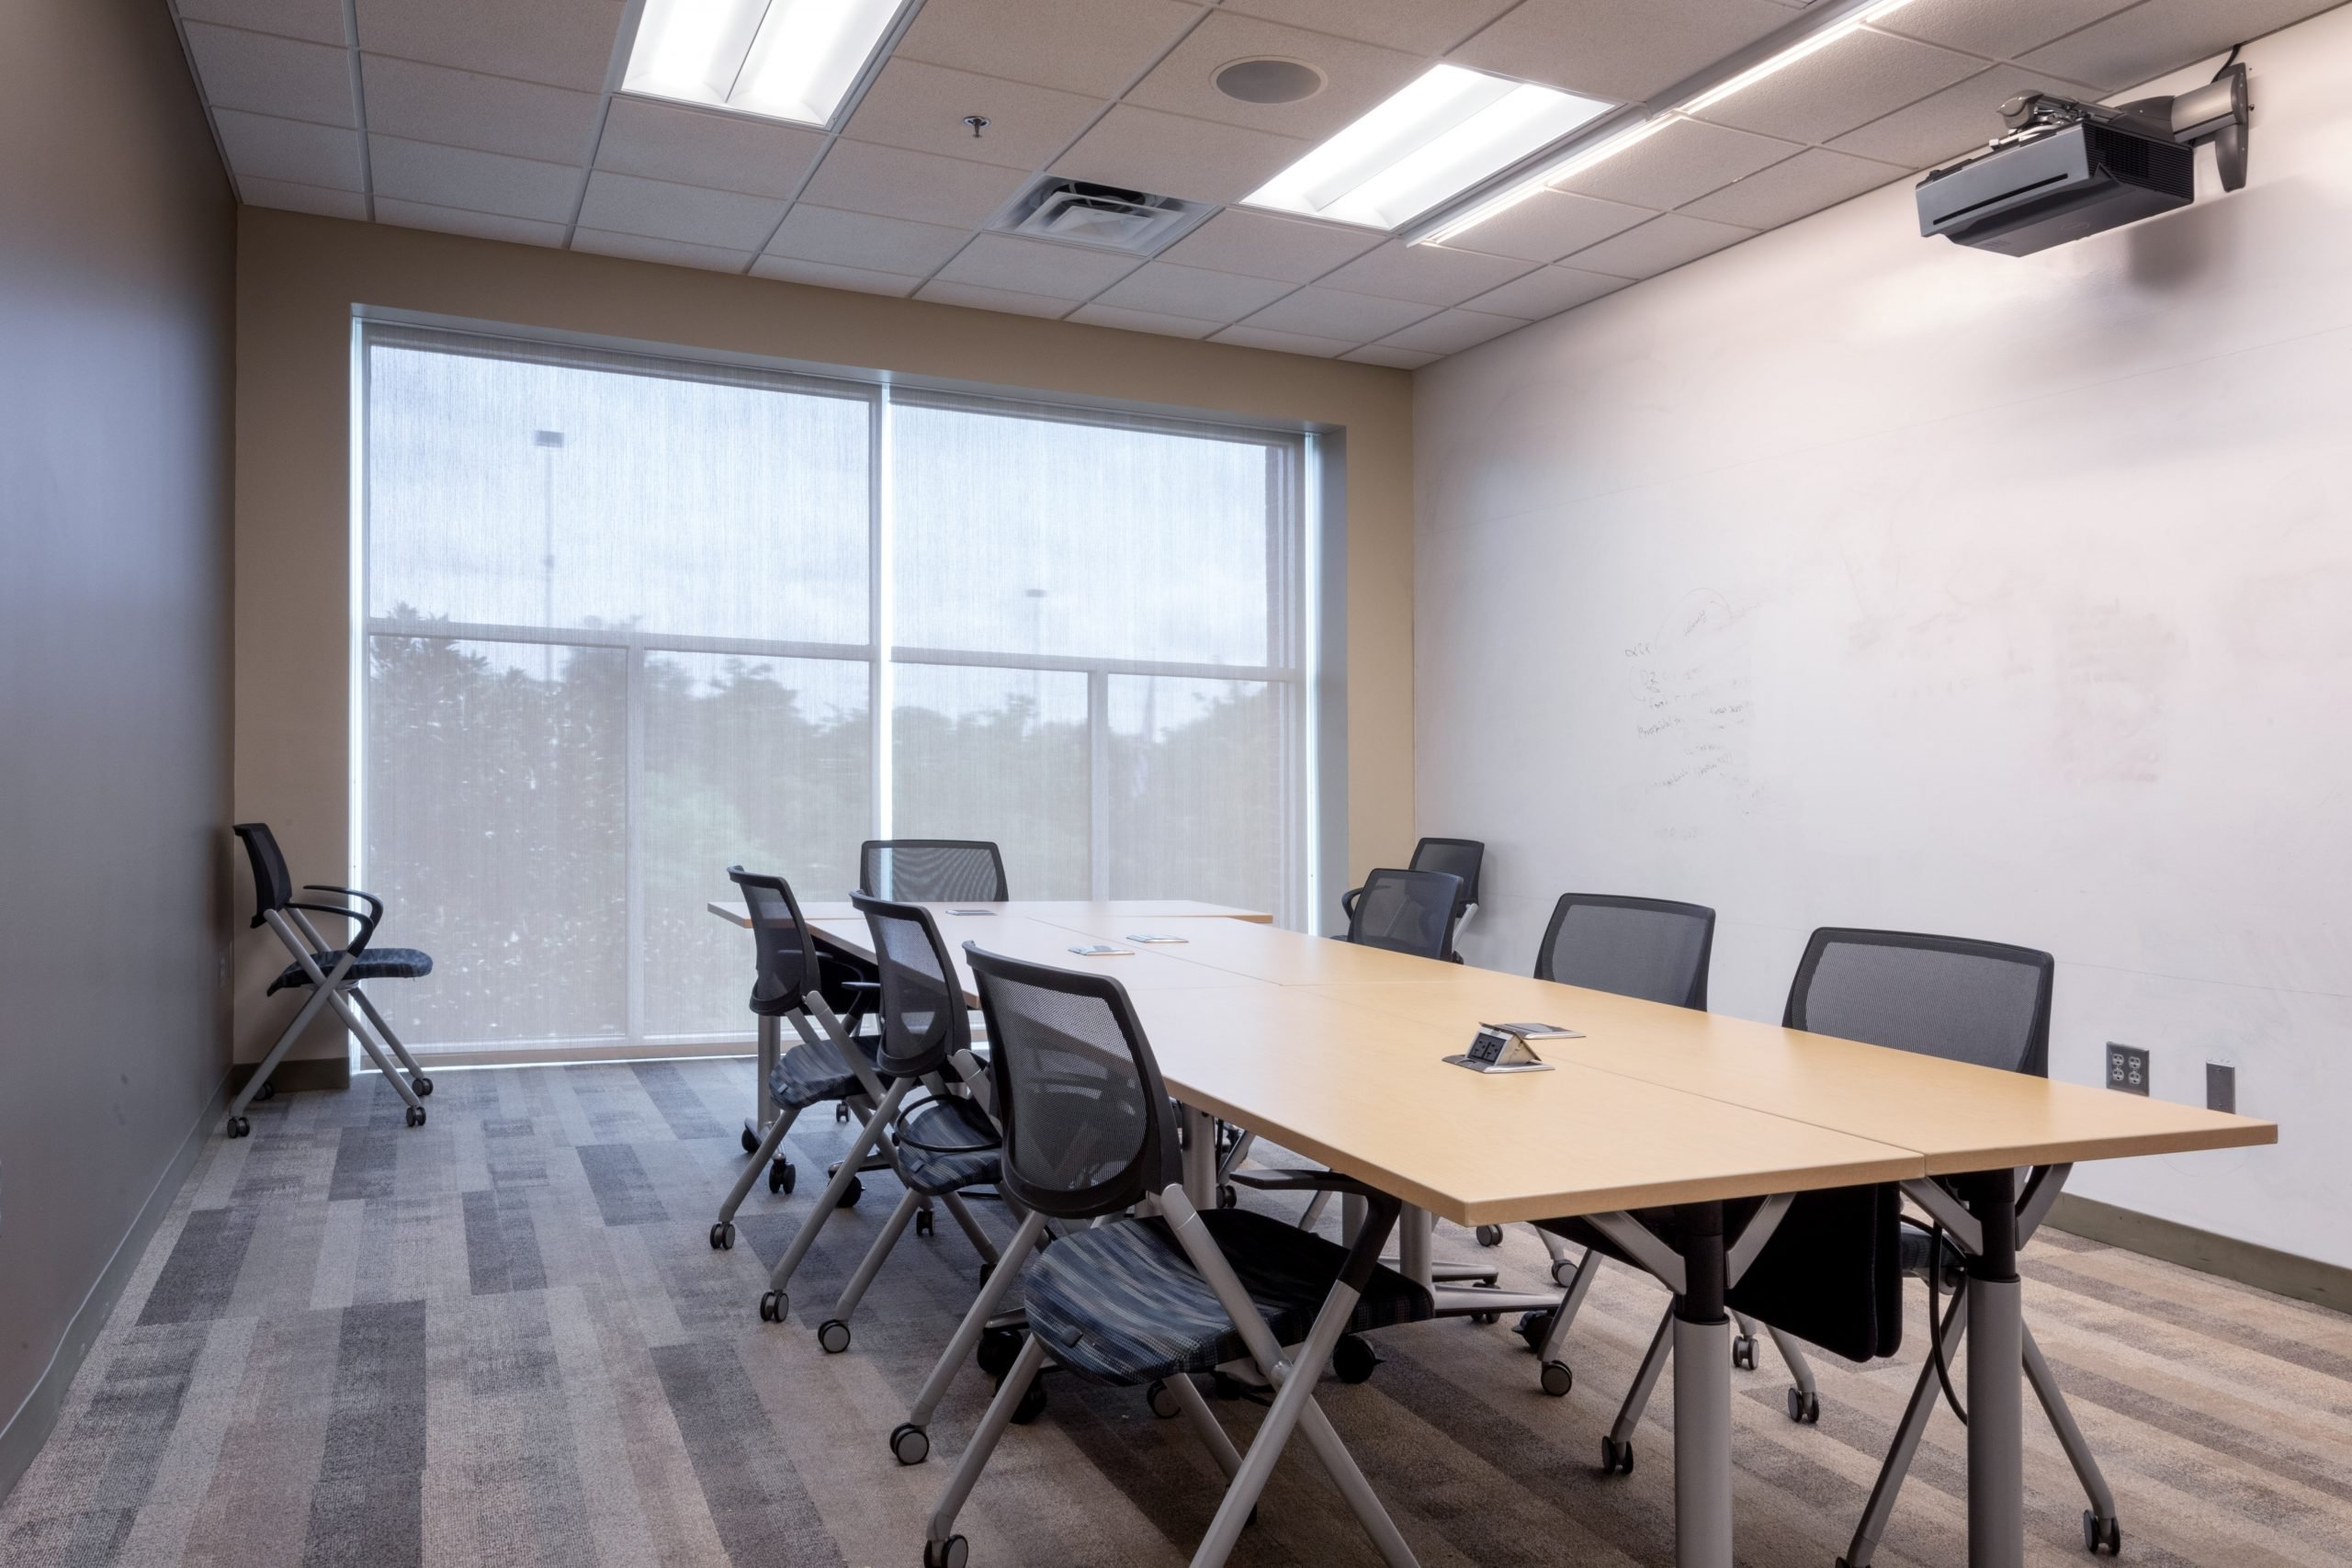 VEC Small Collaboration Rooms